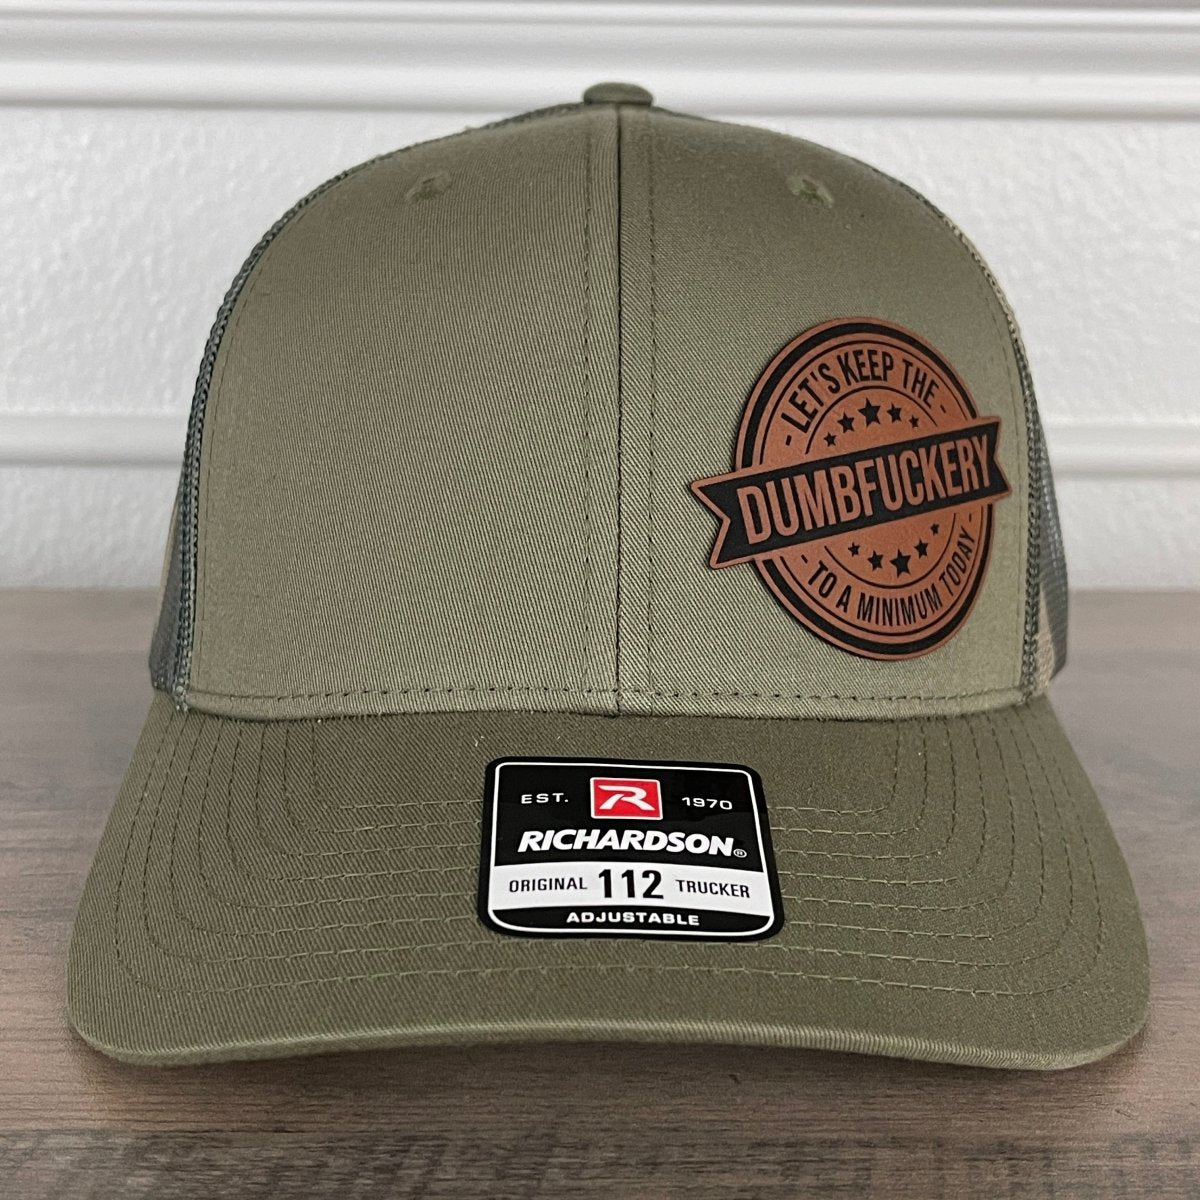 Let's Keep The DUMBFCKERY To A Minimum Today Funny Leather Patch Hat Green/Camo Patch Hat - VividEditions